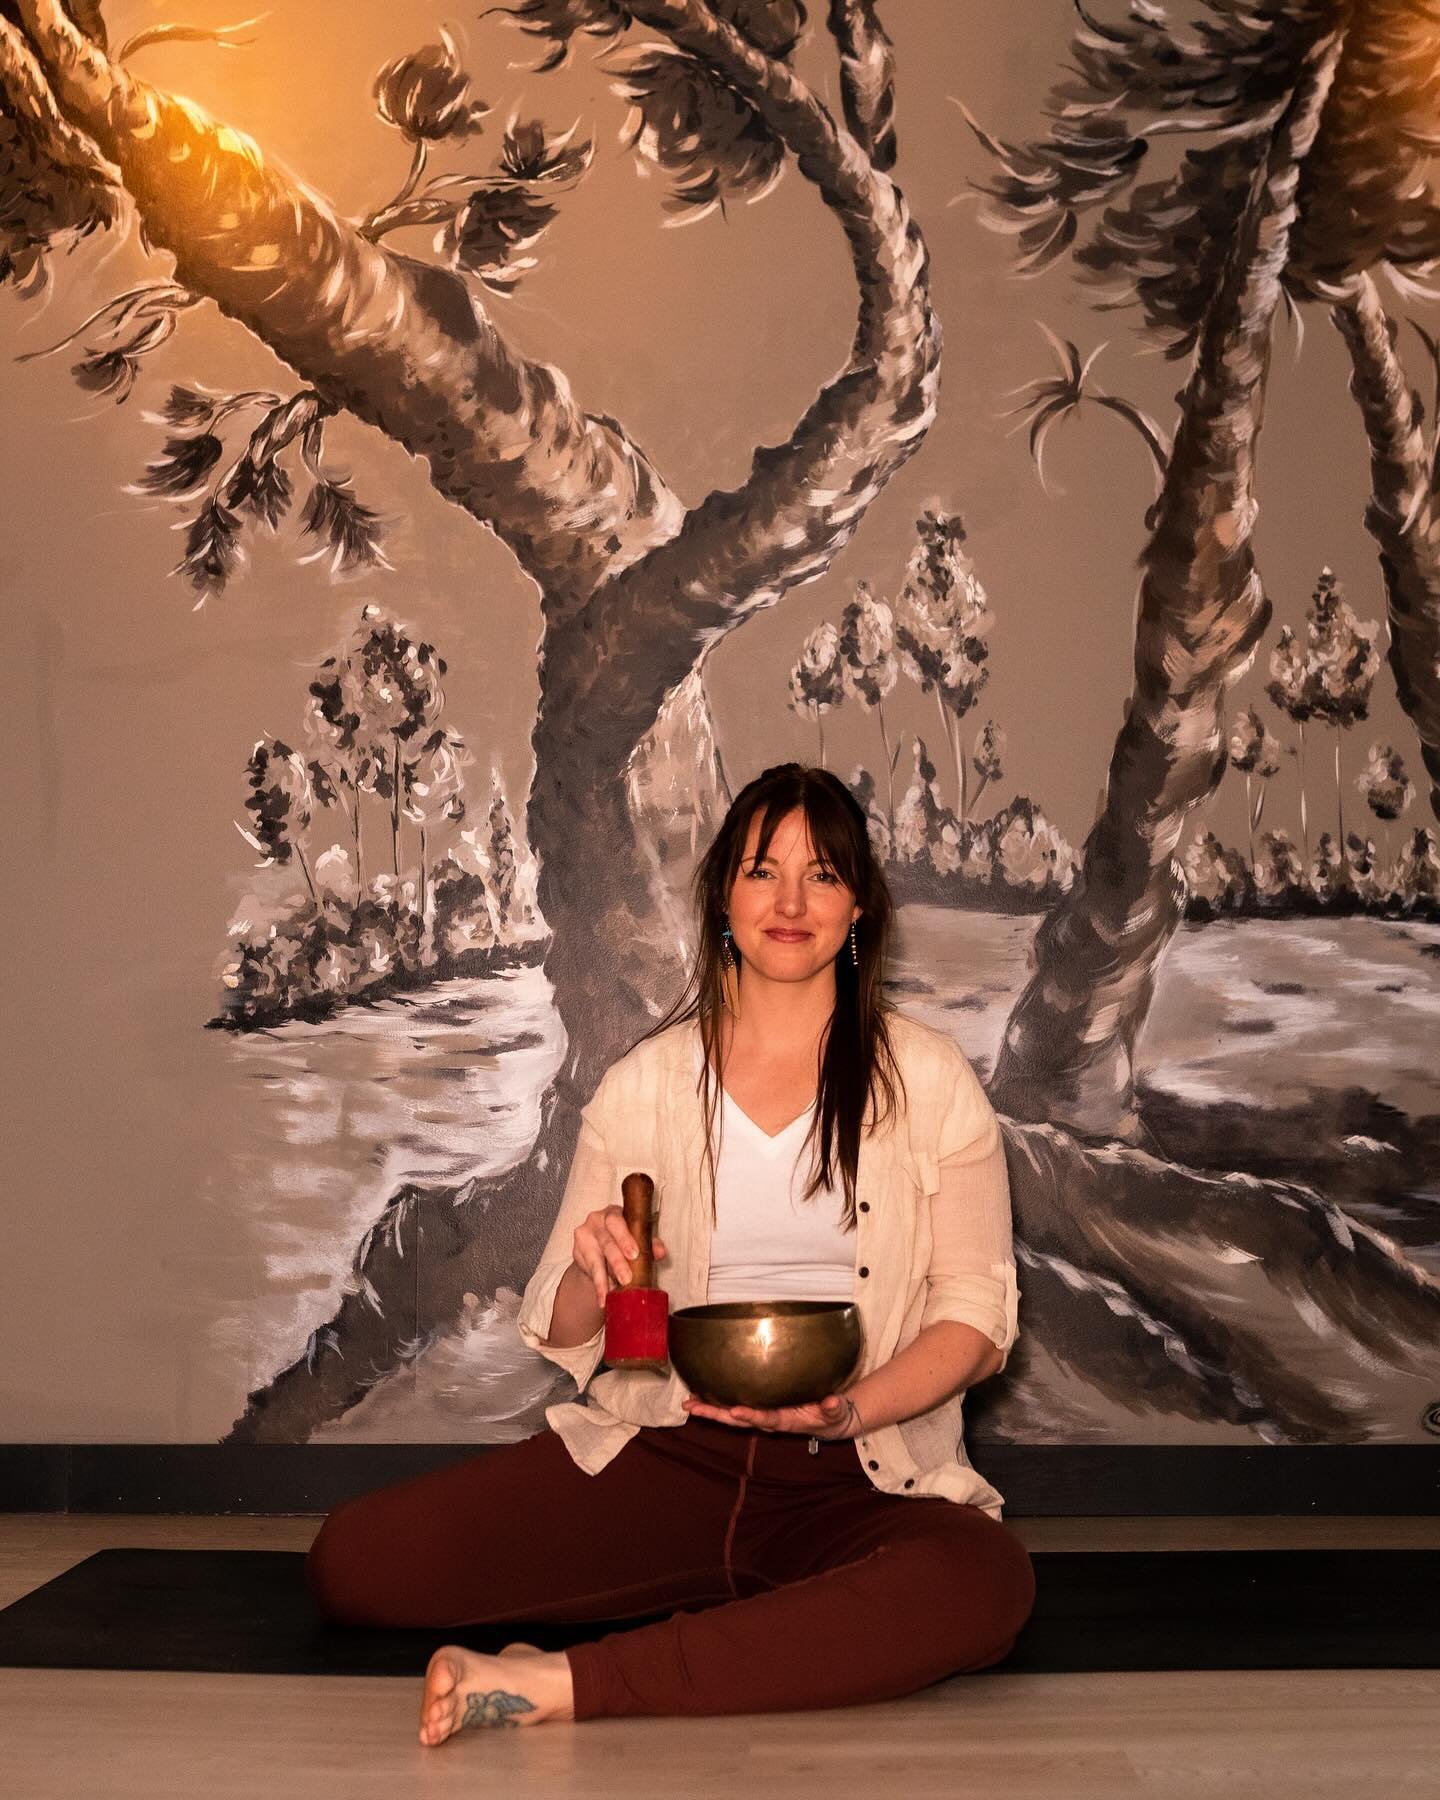 Join Kristie Friday, May 10th, 6:30-8pm for an evening of restoration, comfort and creativity. A feast for the senses with a restorative yoga practice accompanied by crystal singing bowls, gentle aromatherapy and guided relaxation. Follow up in the c